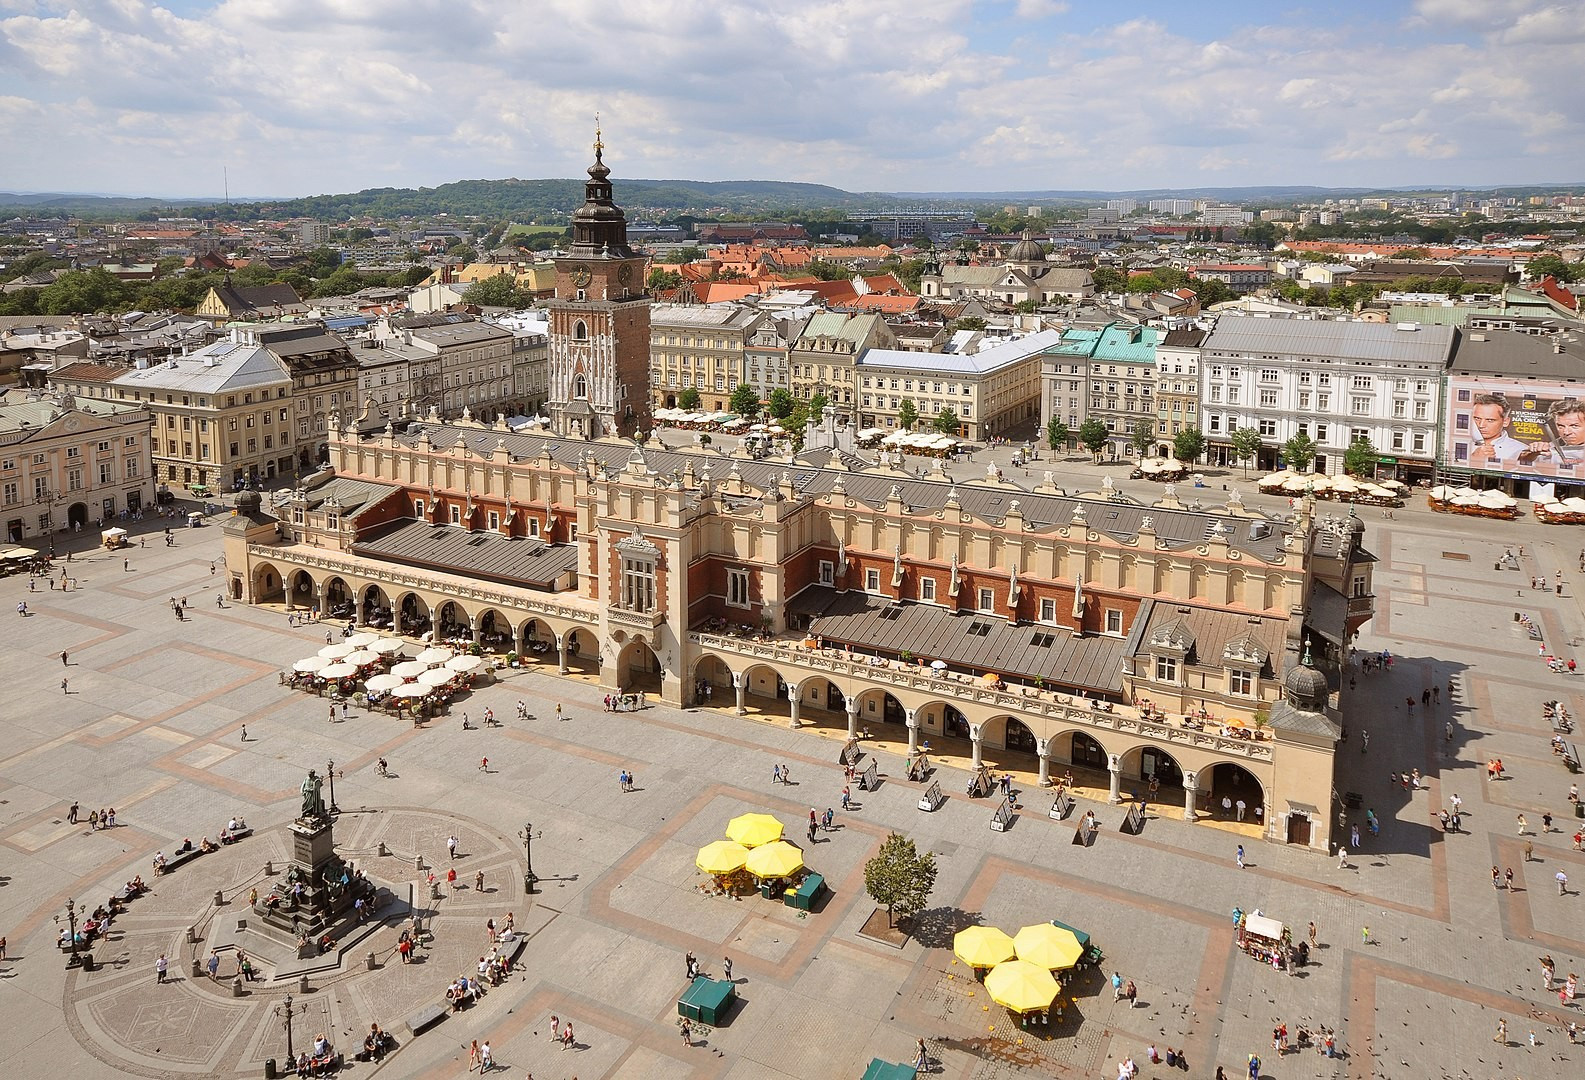 By Jorge Lascar - Sukiennice and Main Square as seen from St. Mary's Basilica, CC BY 2.0, https://commons.wikimedia.org/w/index.php?curid=26948762